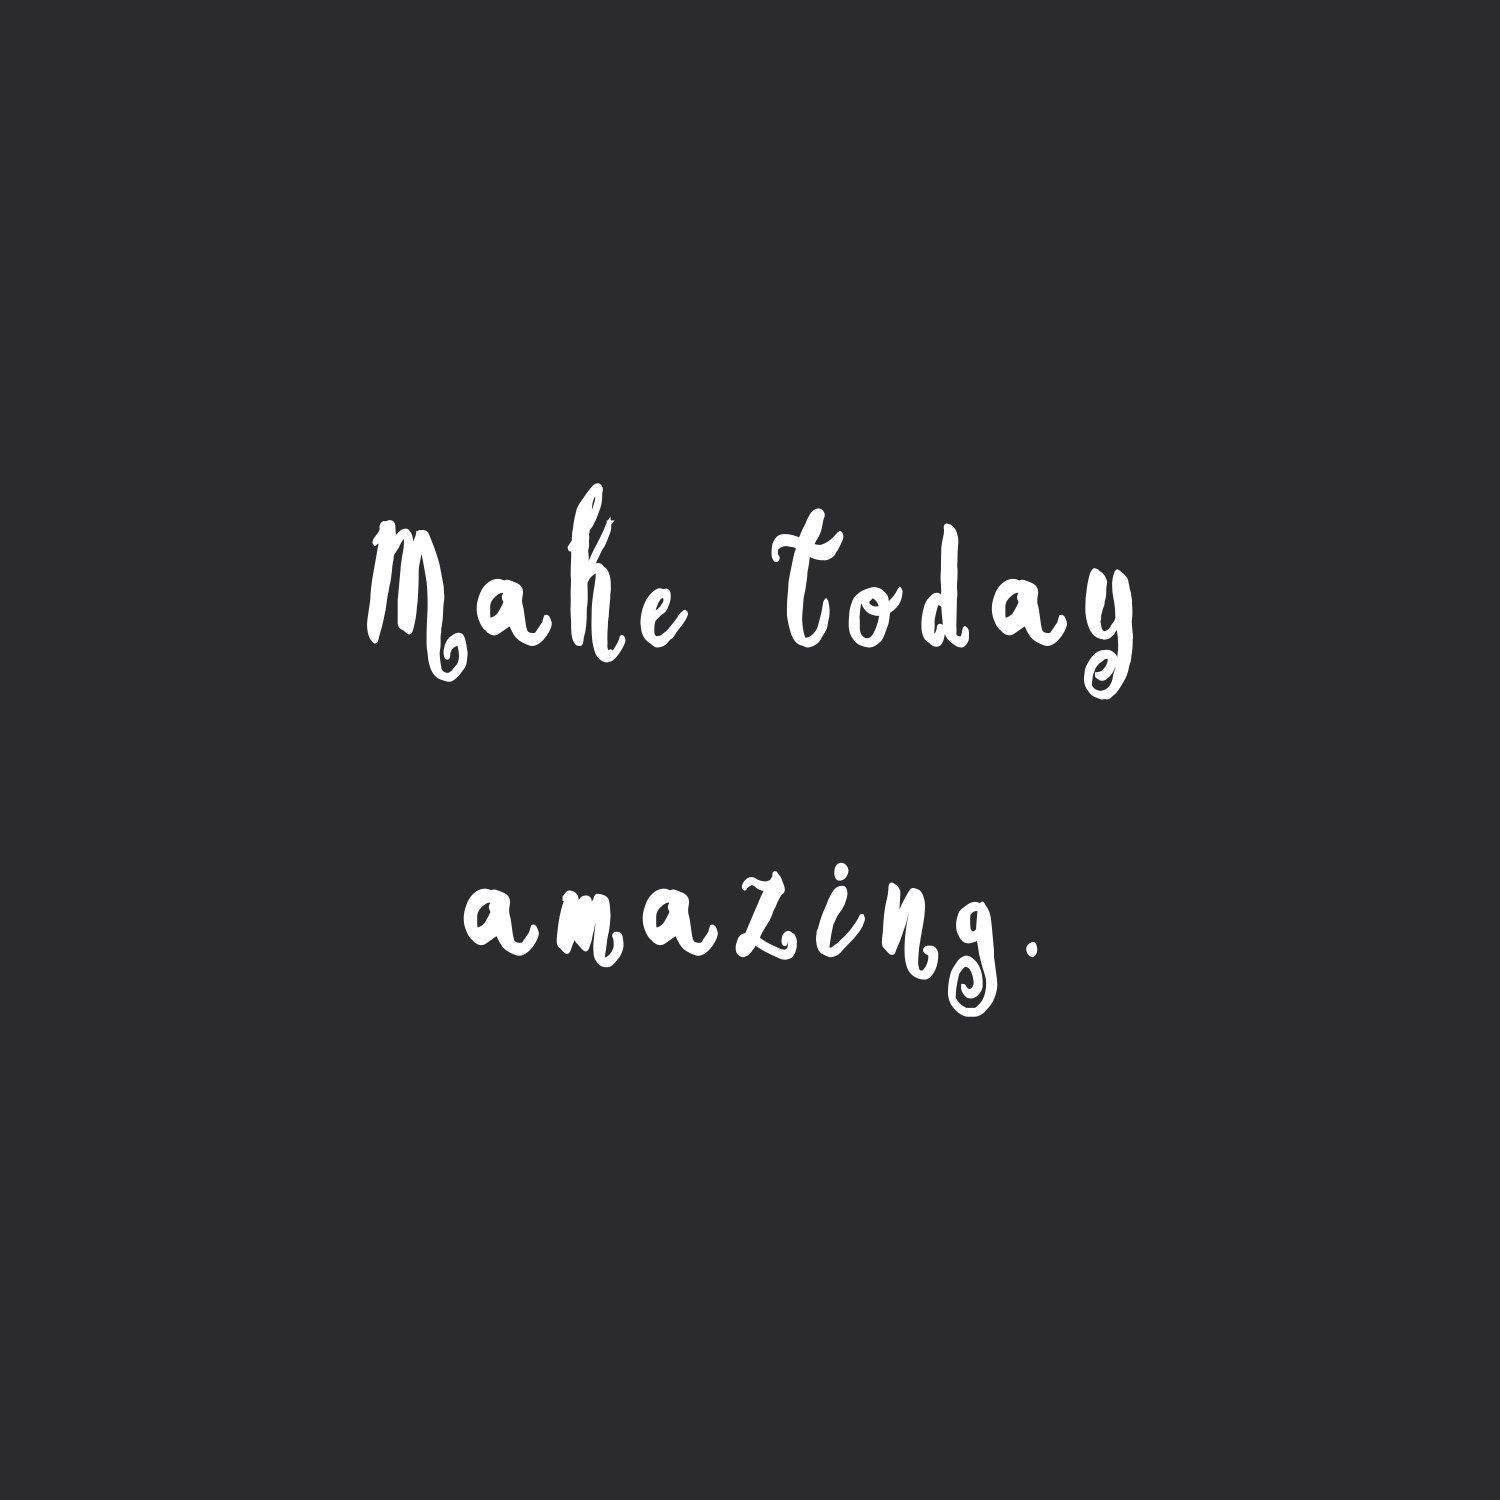 Make today amazing! Browse our collection of motivational training and weight loss quotes and get instant health and fitness inspiration. Transform positive thoughts into positive actions and get fit, healthy and happy! https://www.spotebi.com/workout-motivation/make-today-amazing/